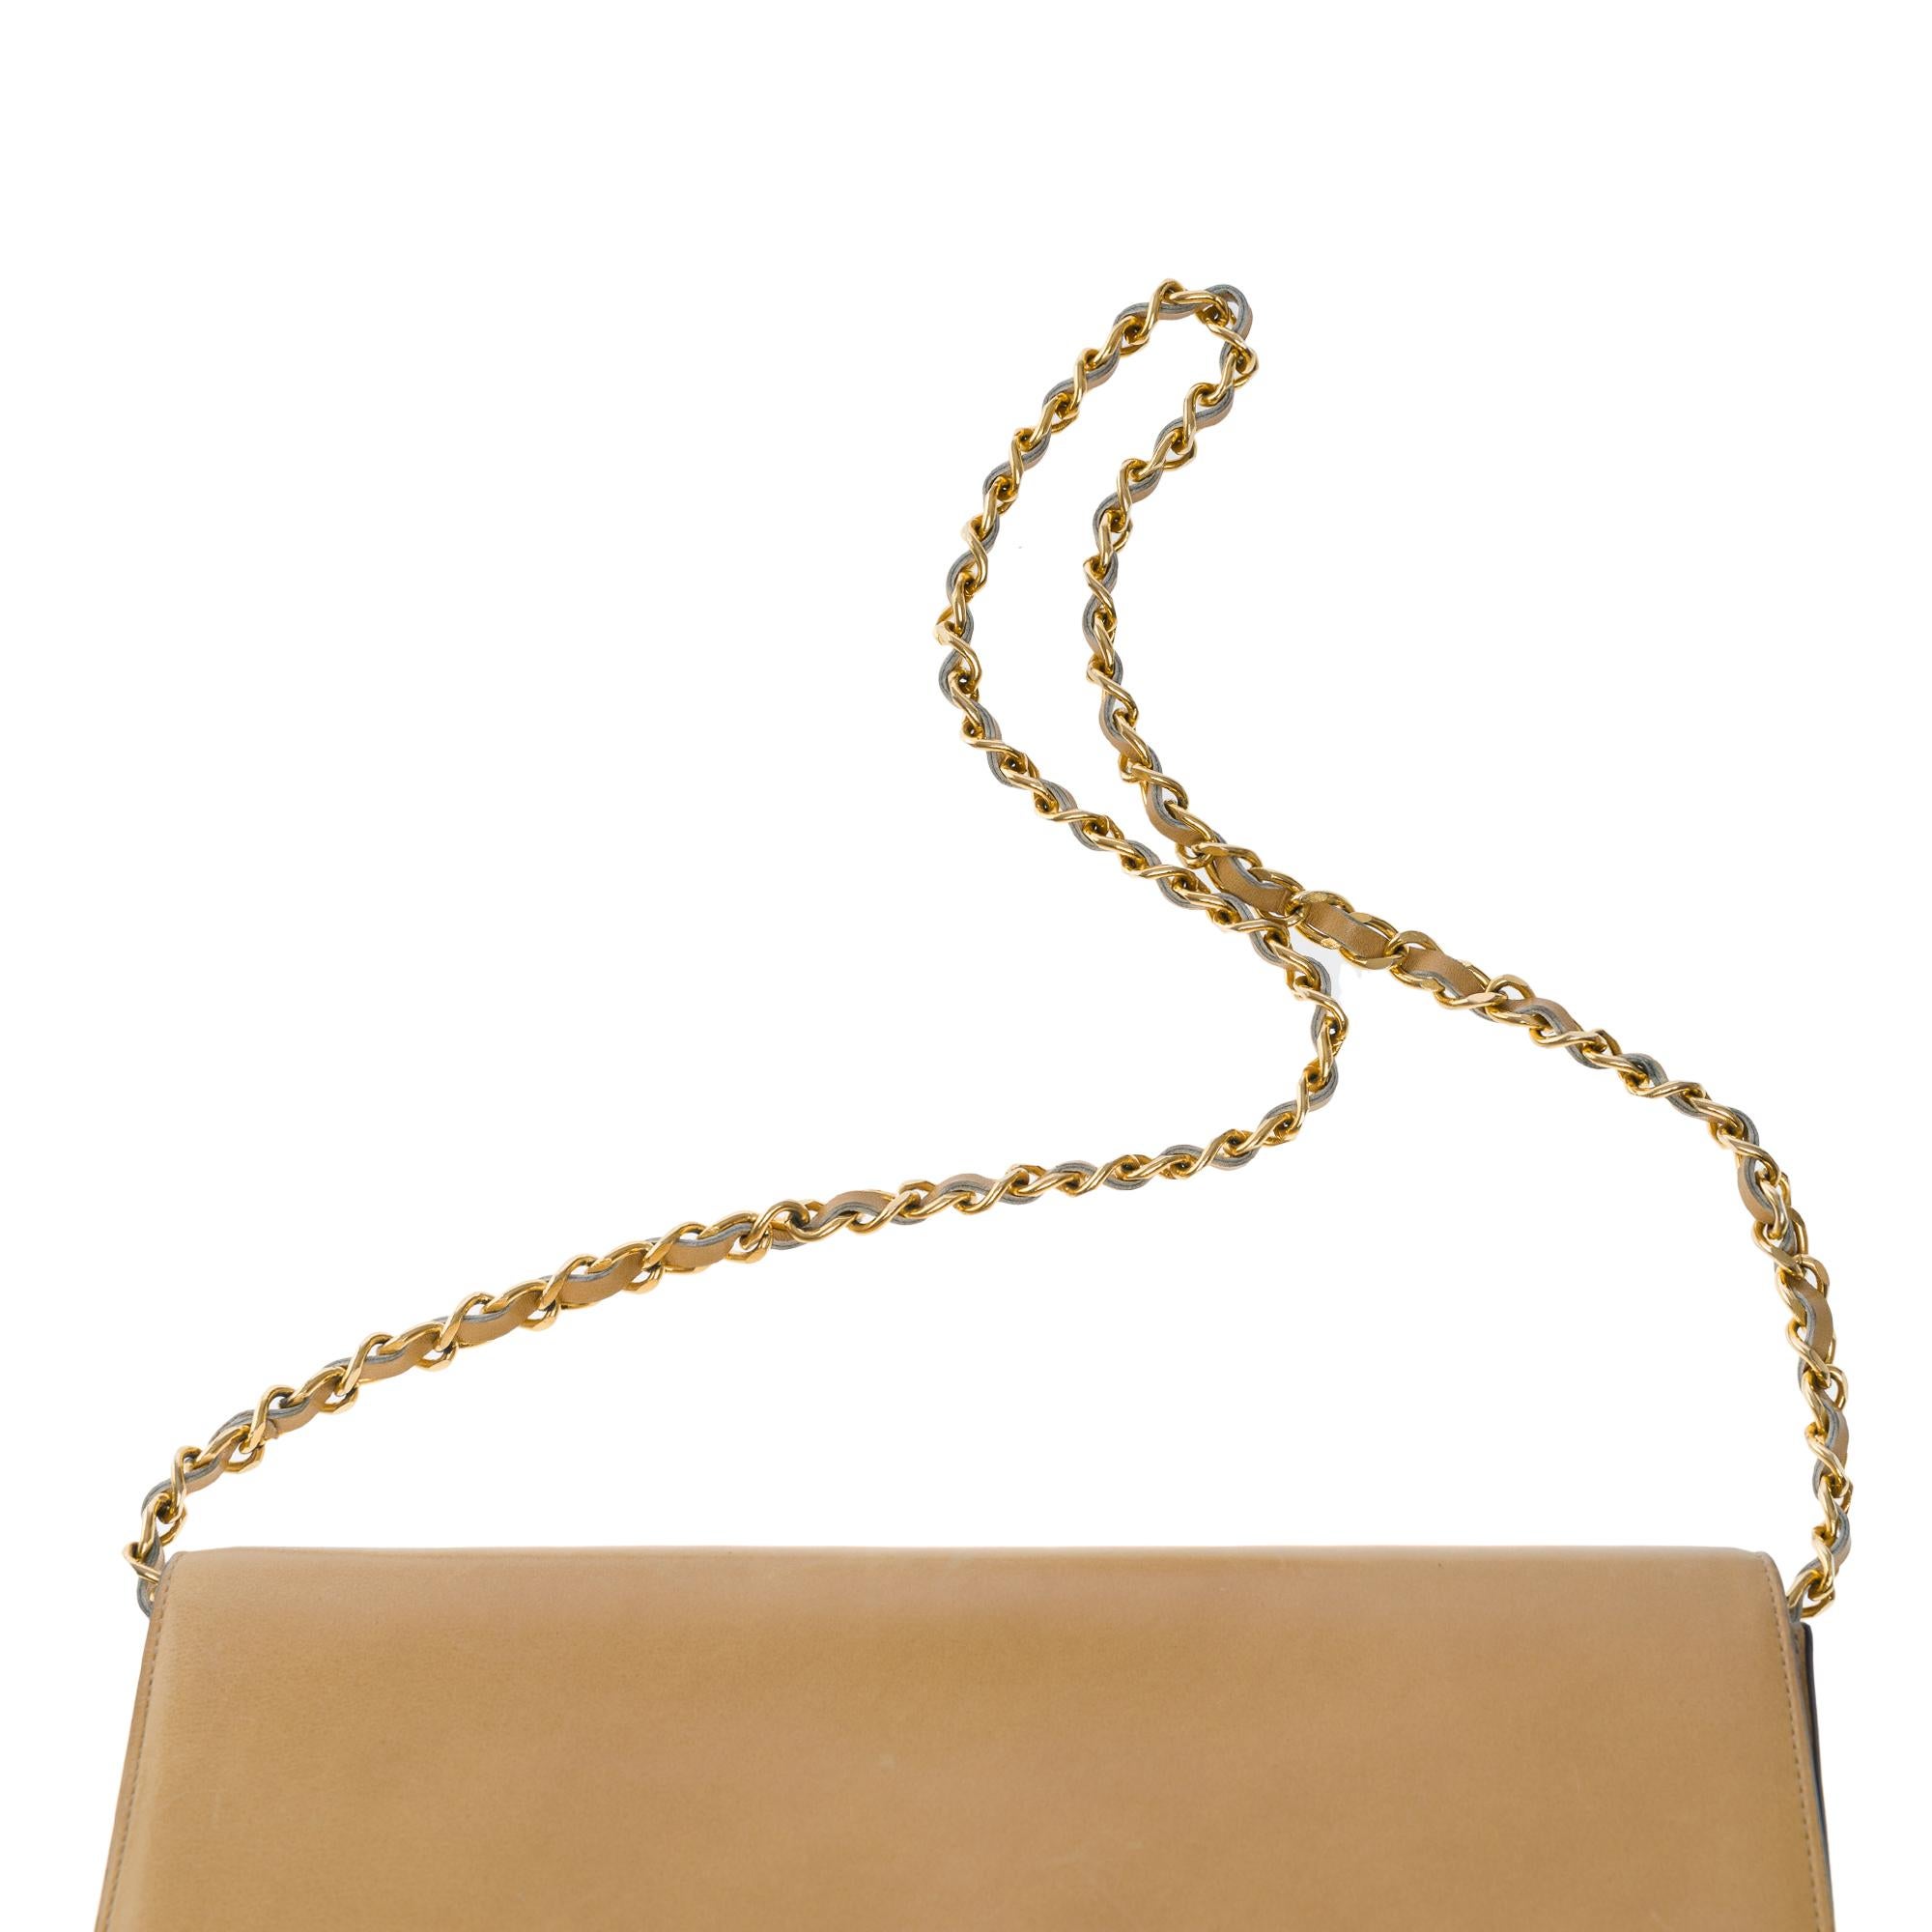 Gorgeous Chanel Classic shoulder flap bag in beige box calfskin leather, GHW For Sale 5